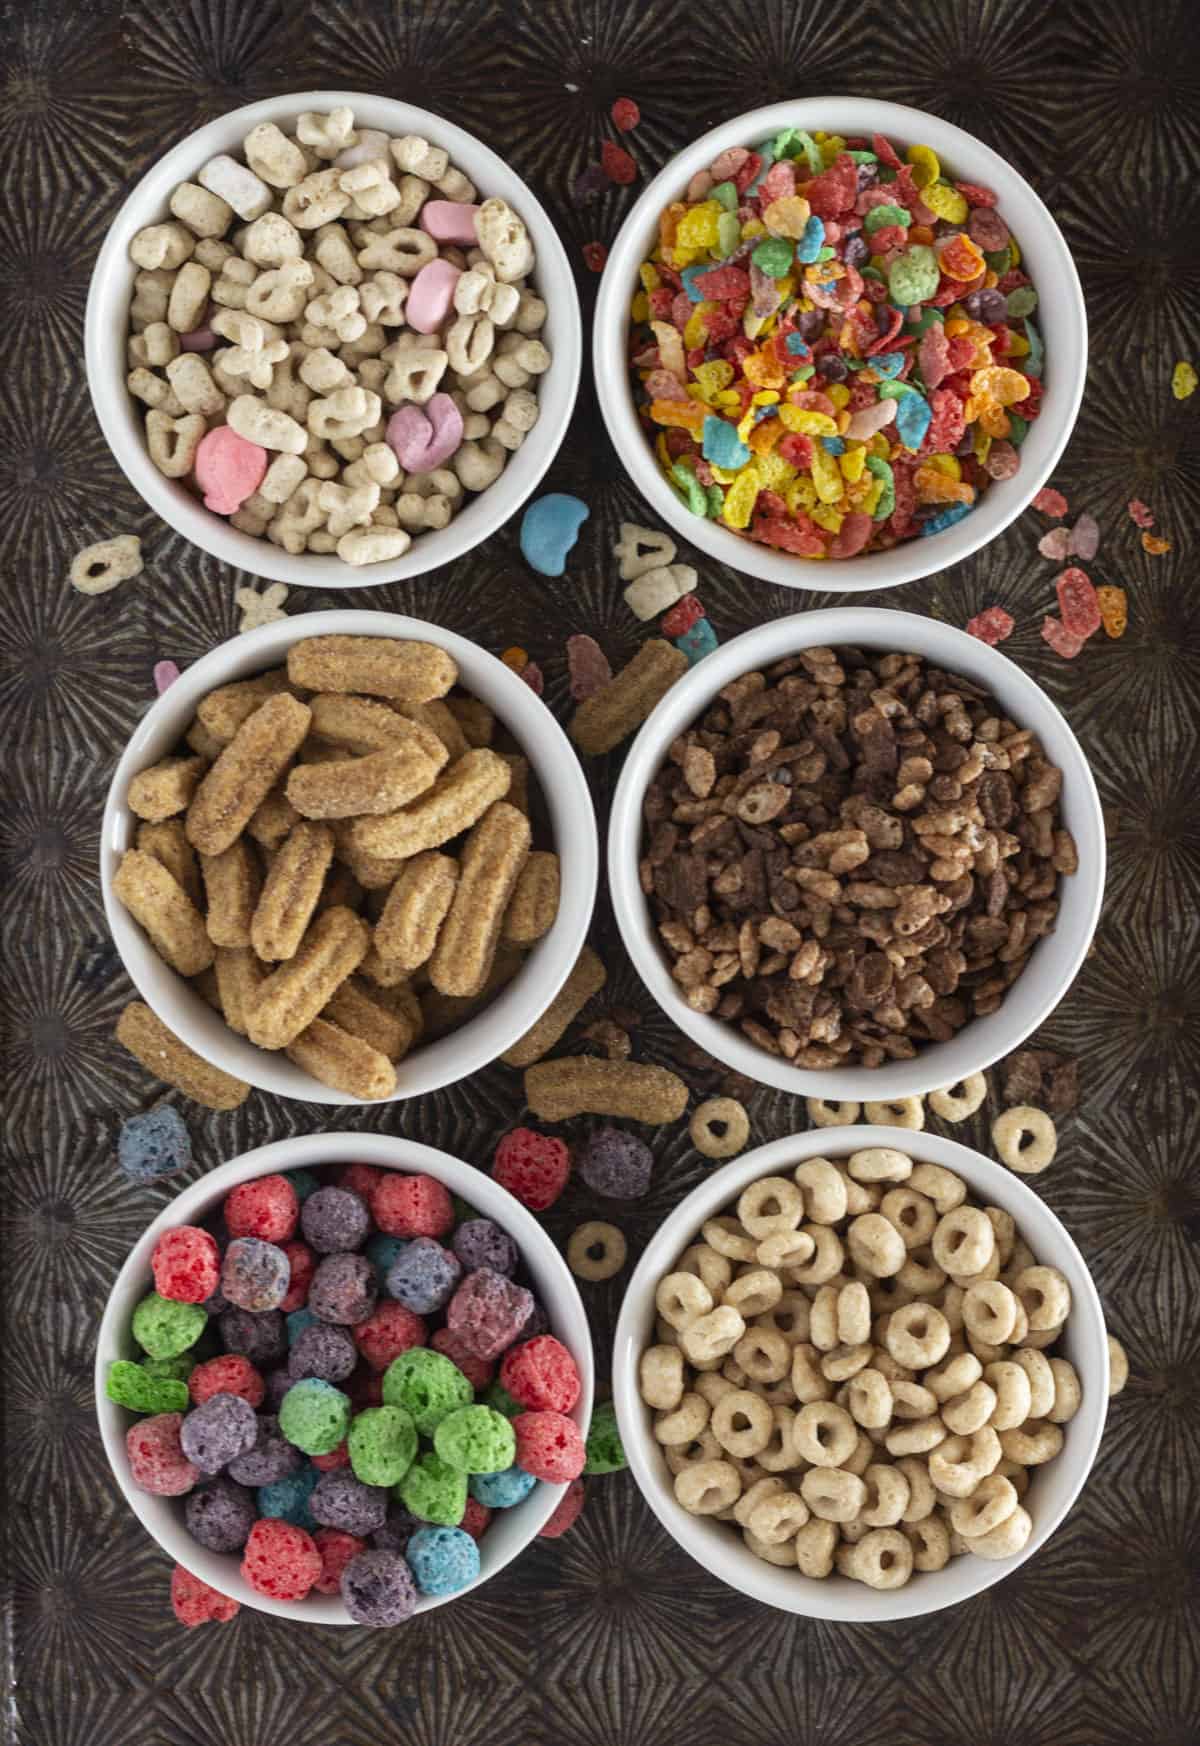 A photo with different kinds of cereal that would work wonderfully in cereal milk frosting.